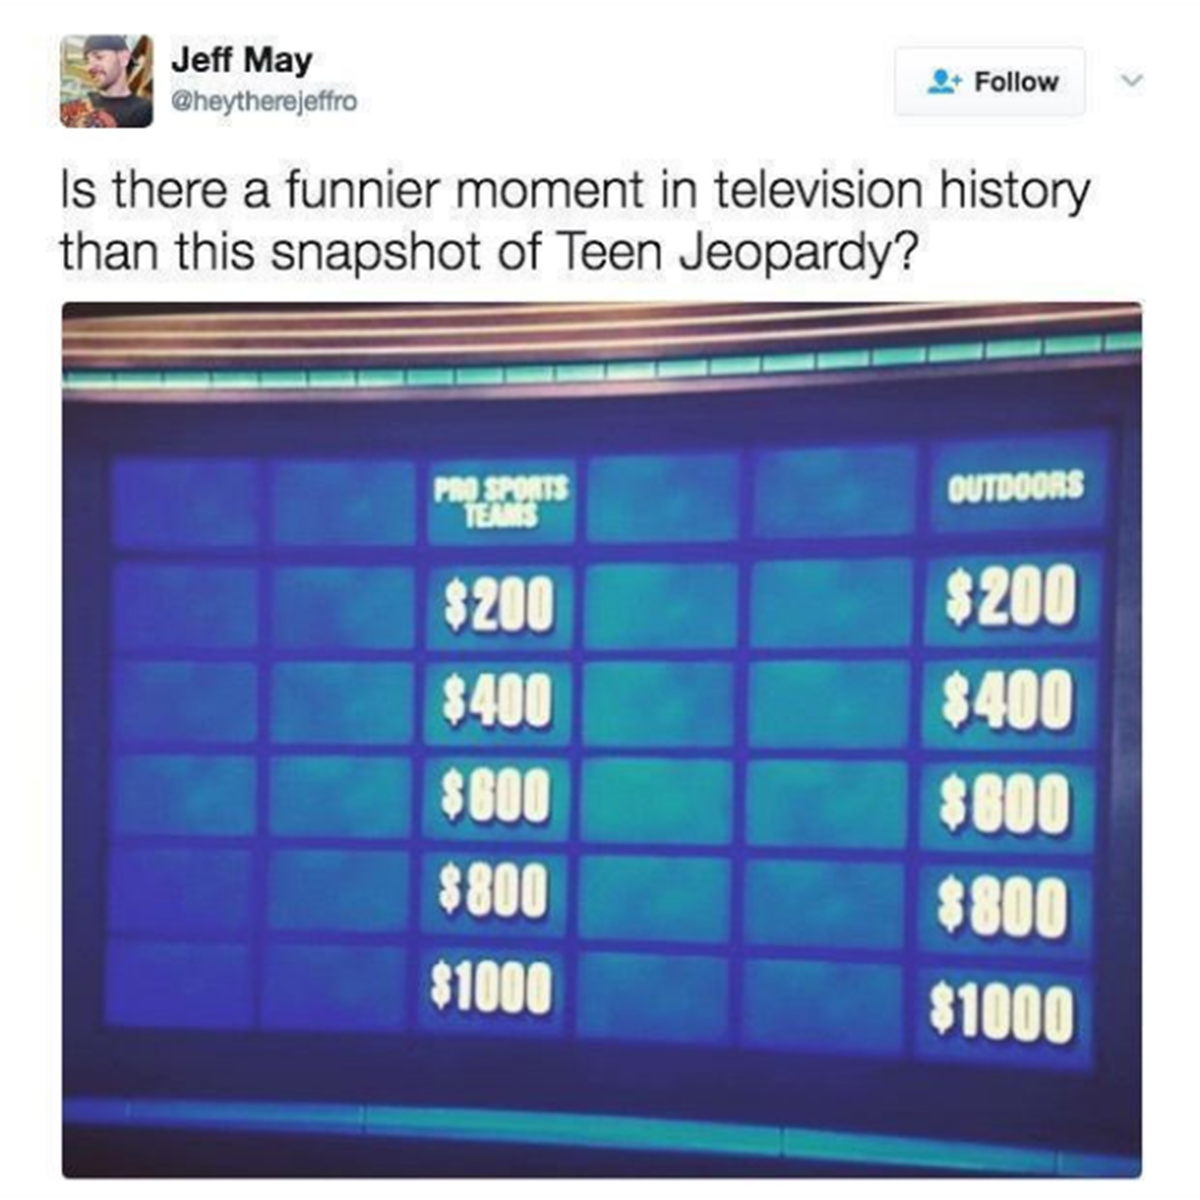 display device - Jeff May Cheytherejeffro Is there a funnier moment in television history than this snapshot of Teen Jeopardy? Pro Sports Teams Outdoors $200 $200 $400 $400 $600 $800 $800 $800 $1000 $1000